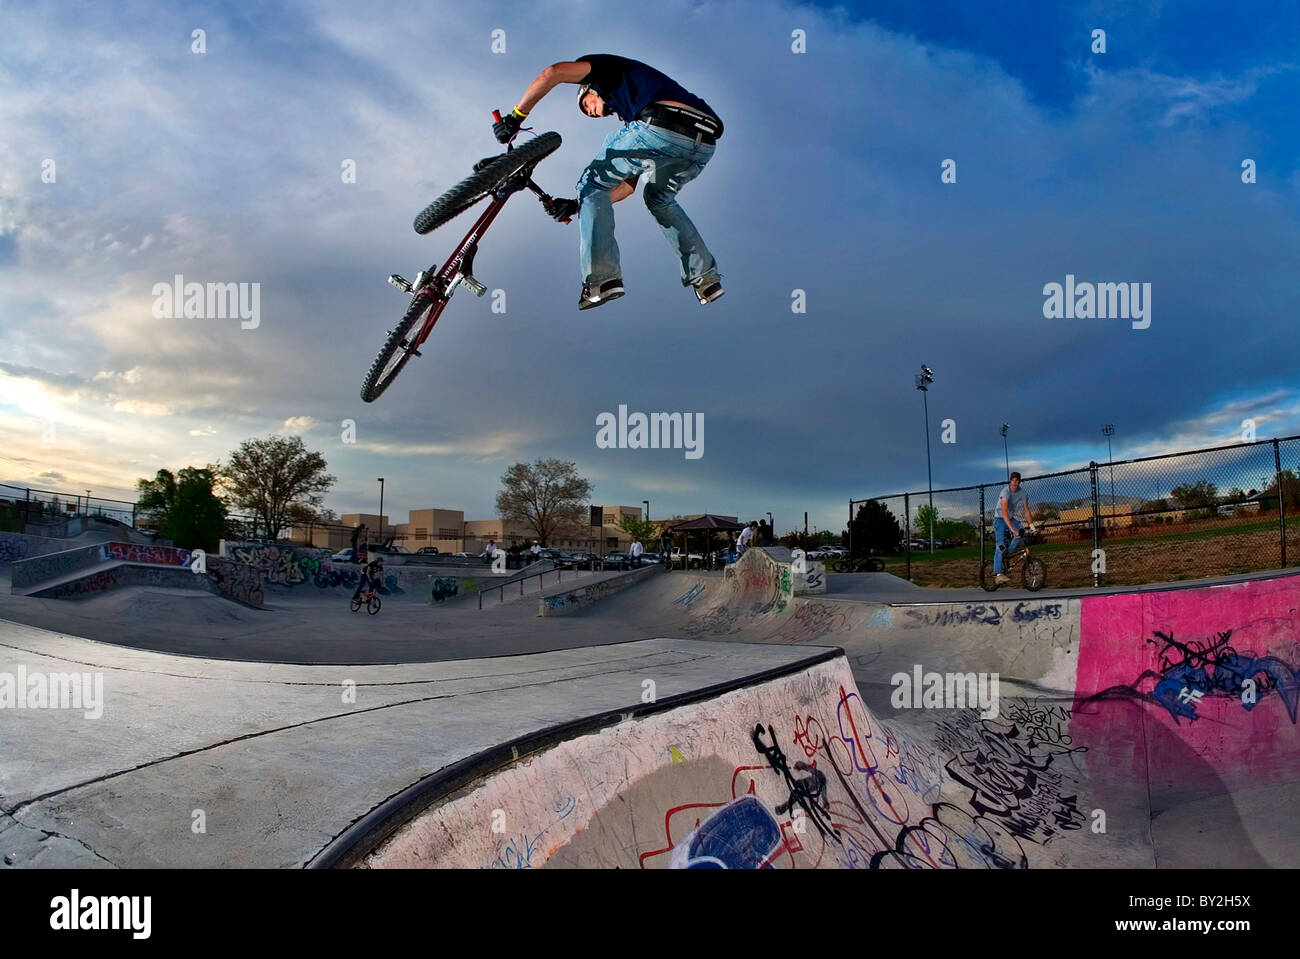 A mountain bike rider does a tailwhip at a skatepark in Santa Fe, NM Stock  Photo - Alamy